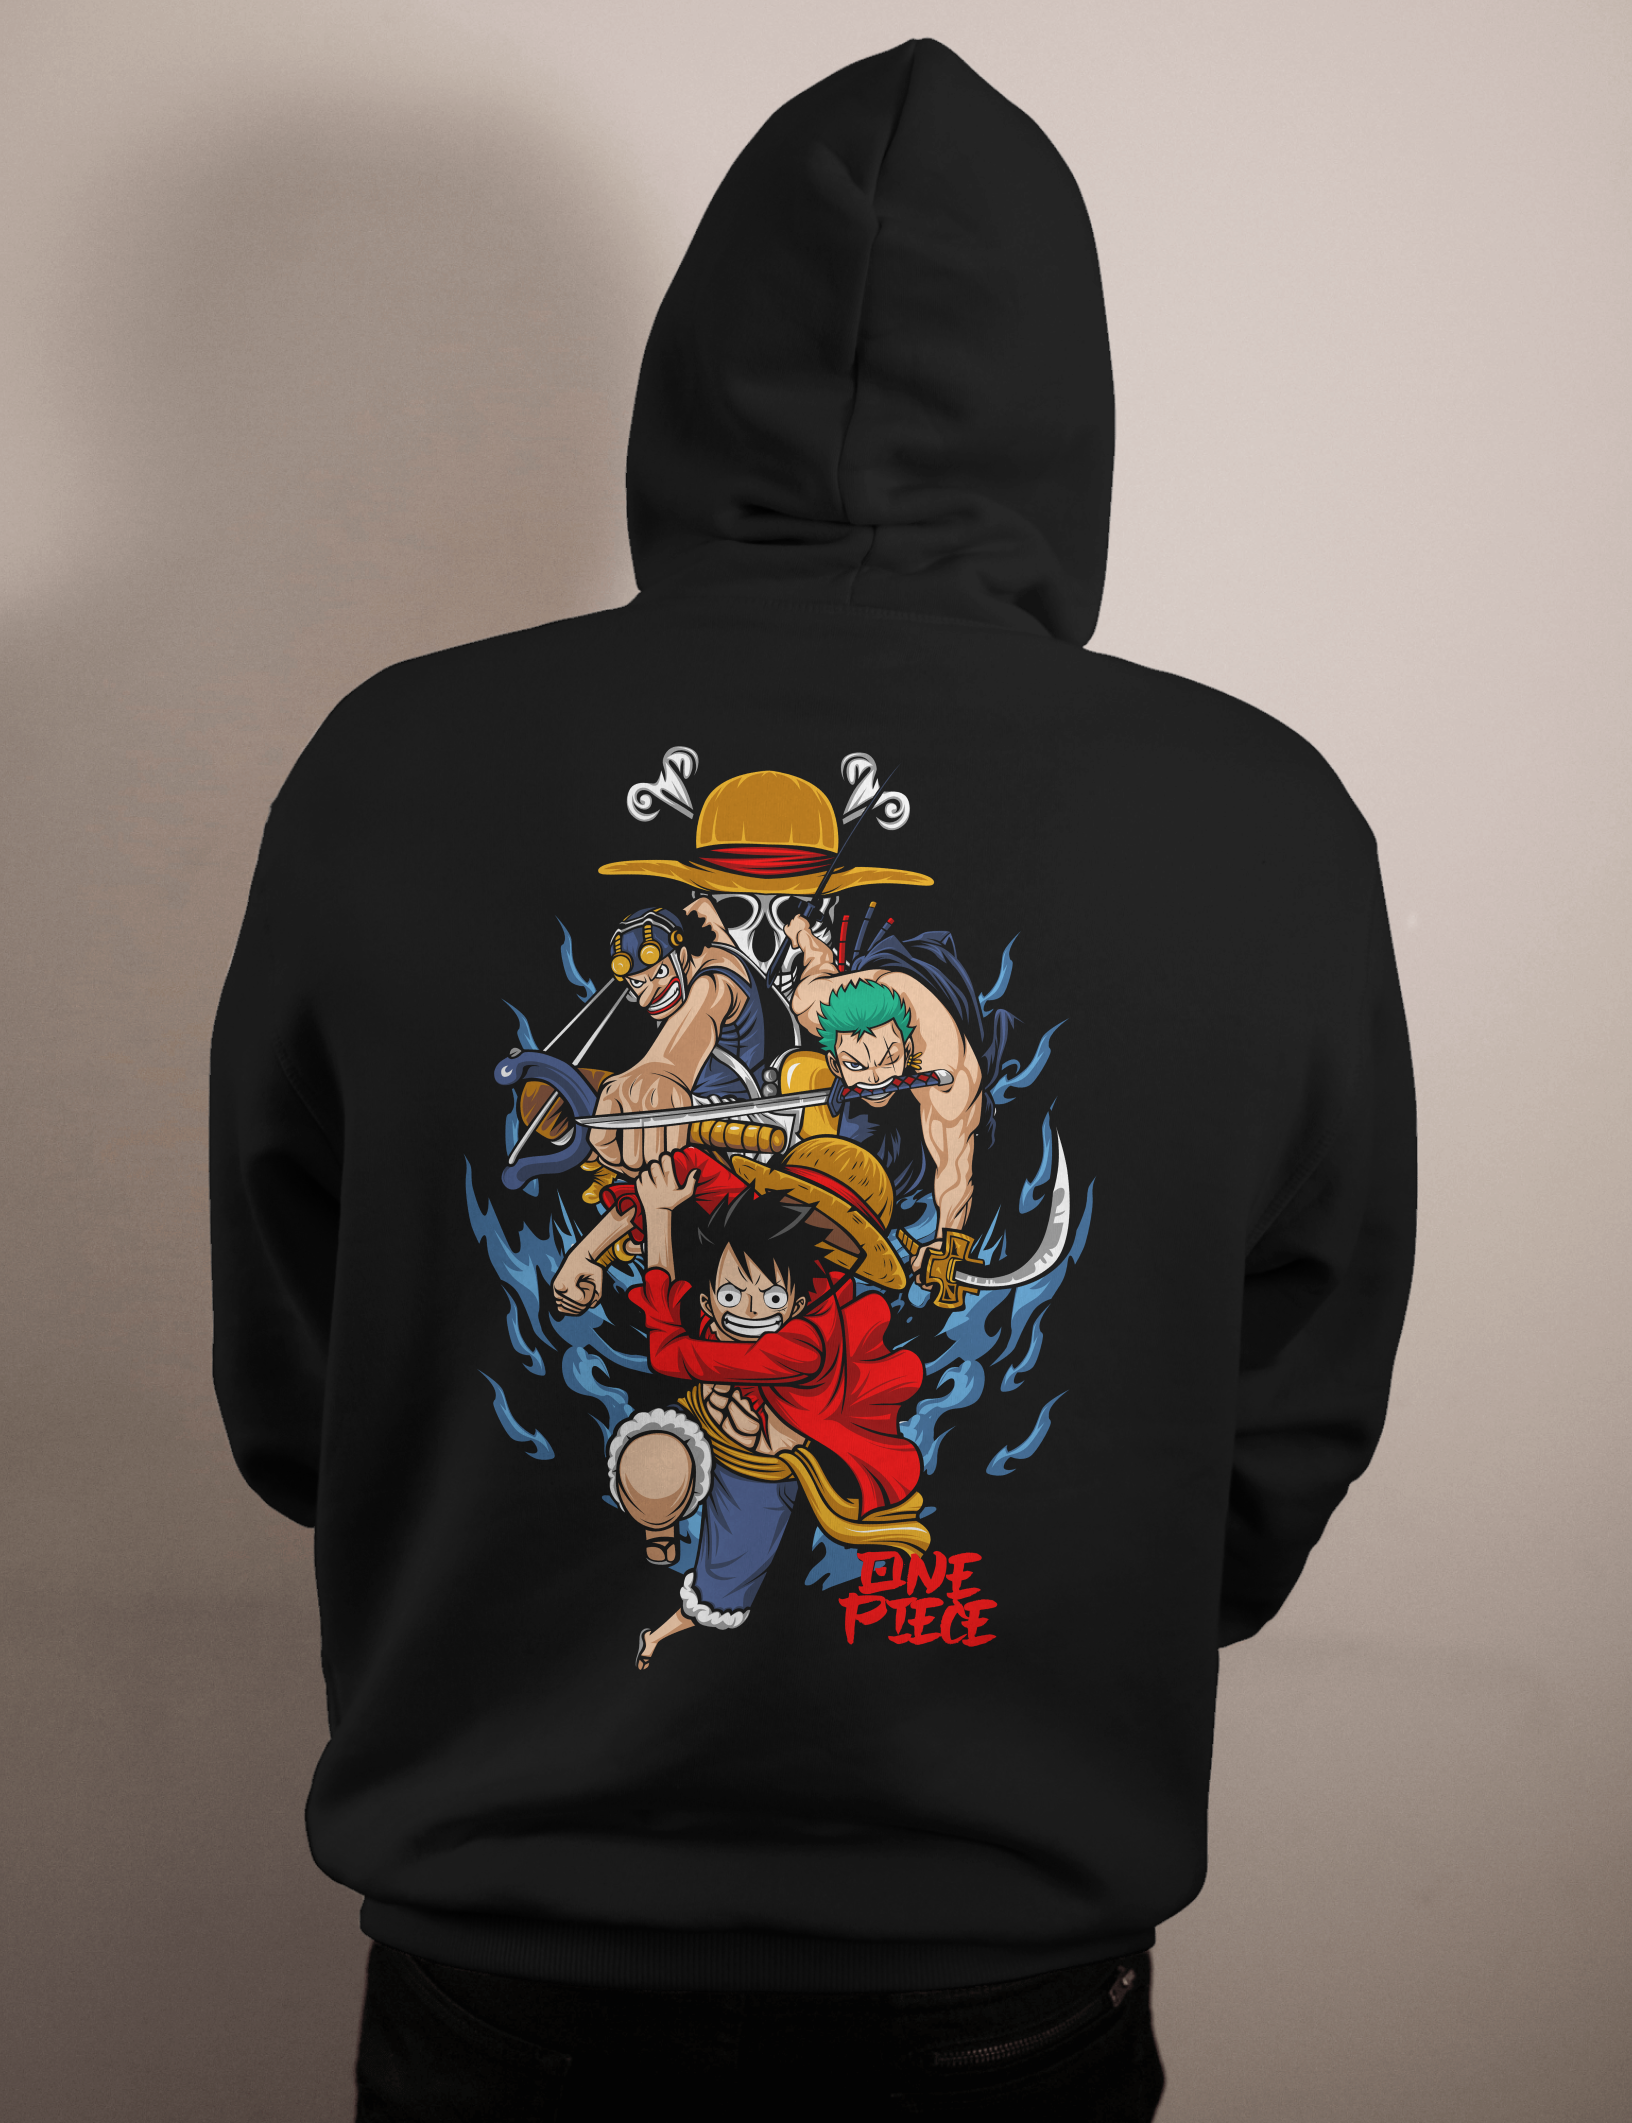 shop and buy one piece anime clothing luffy and zoro hoodie